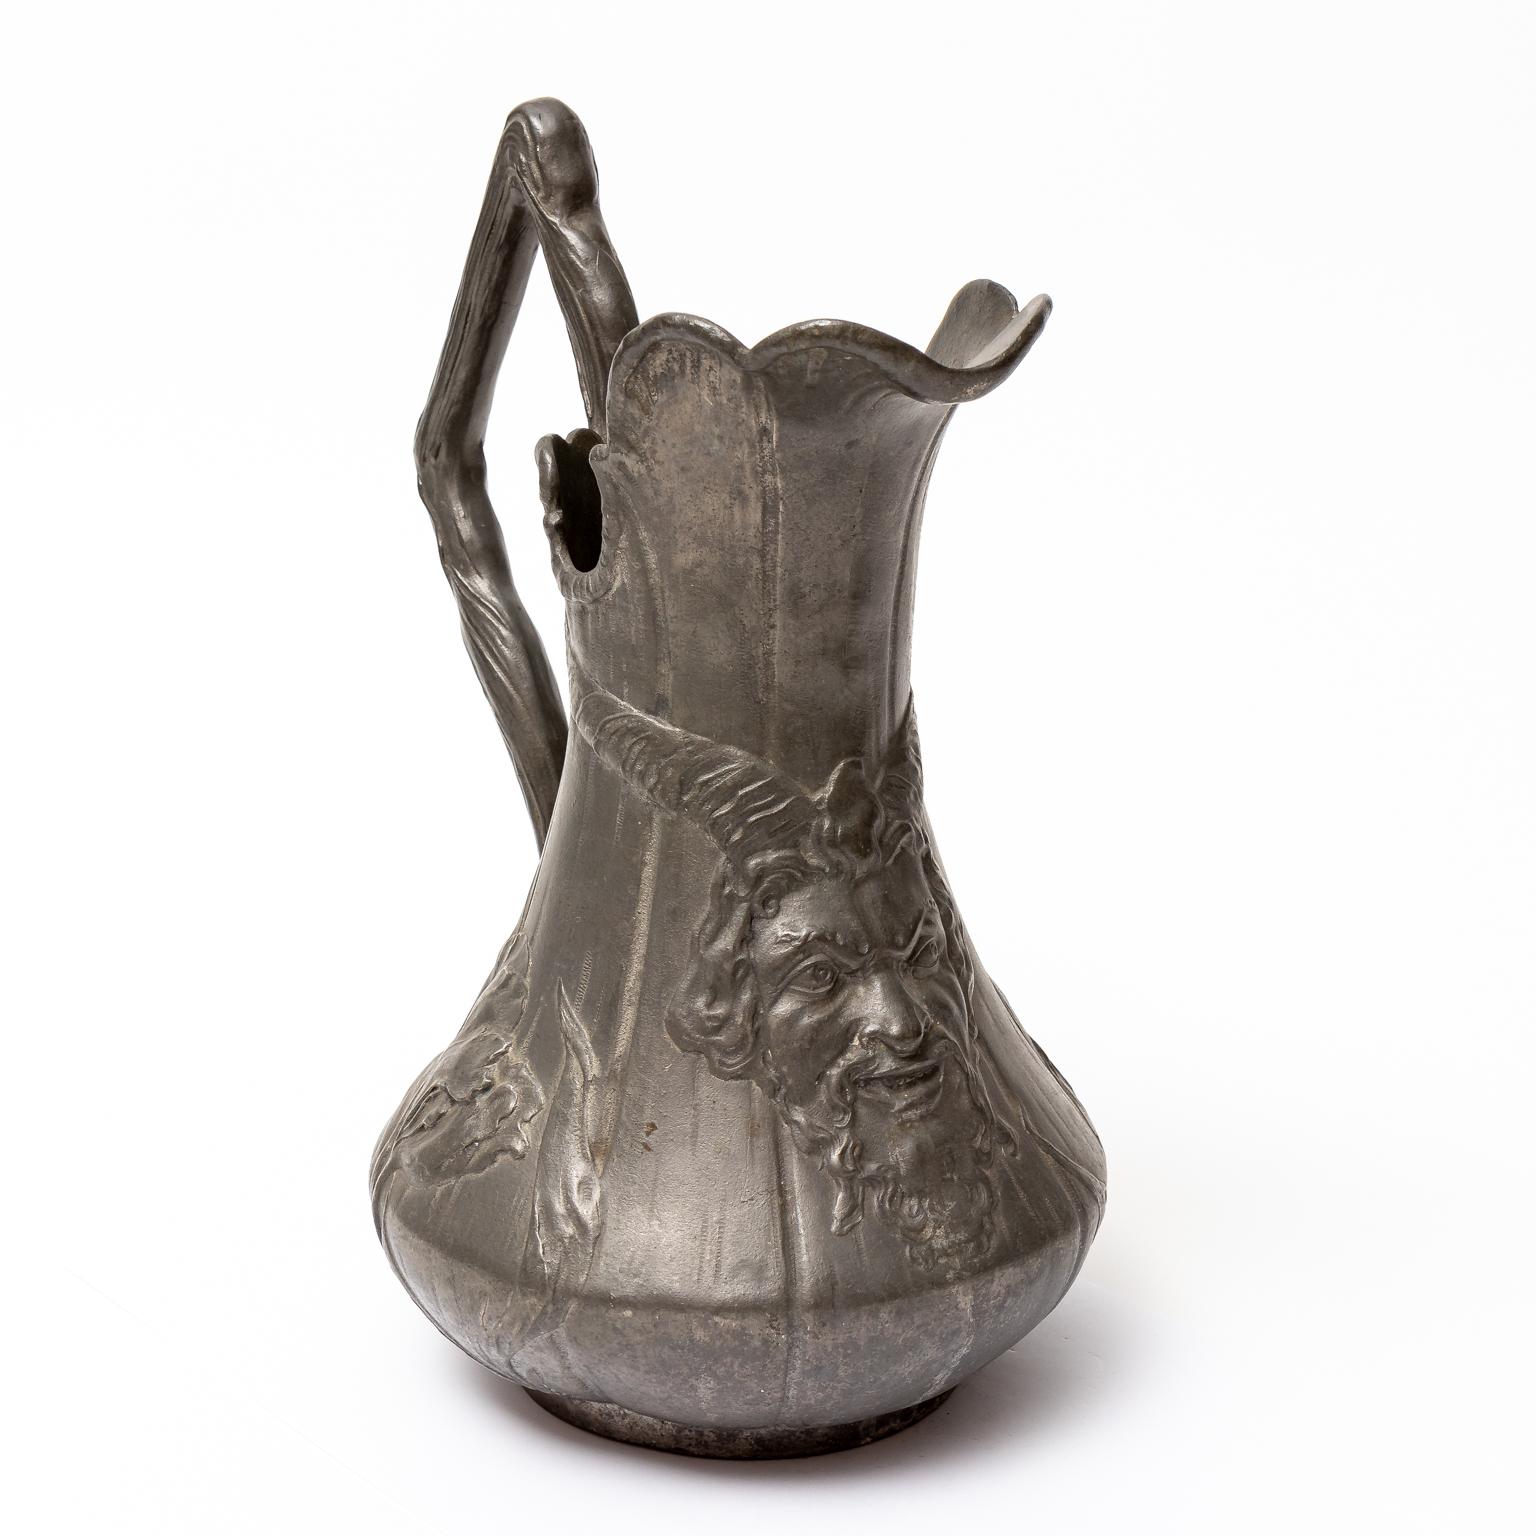 Circa 1900s large German Kayserzinn Art Nouveau style Pewter pitcher. The piece features an irregular ruffled lip, an angular handle. The body is decorated with irises and a Satyr. A maker's mark is impressed on the underside, No. 4061. Made in